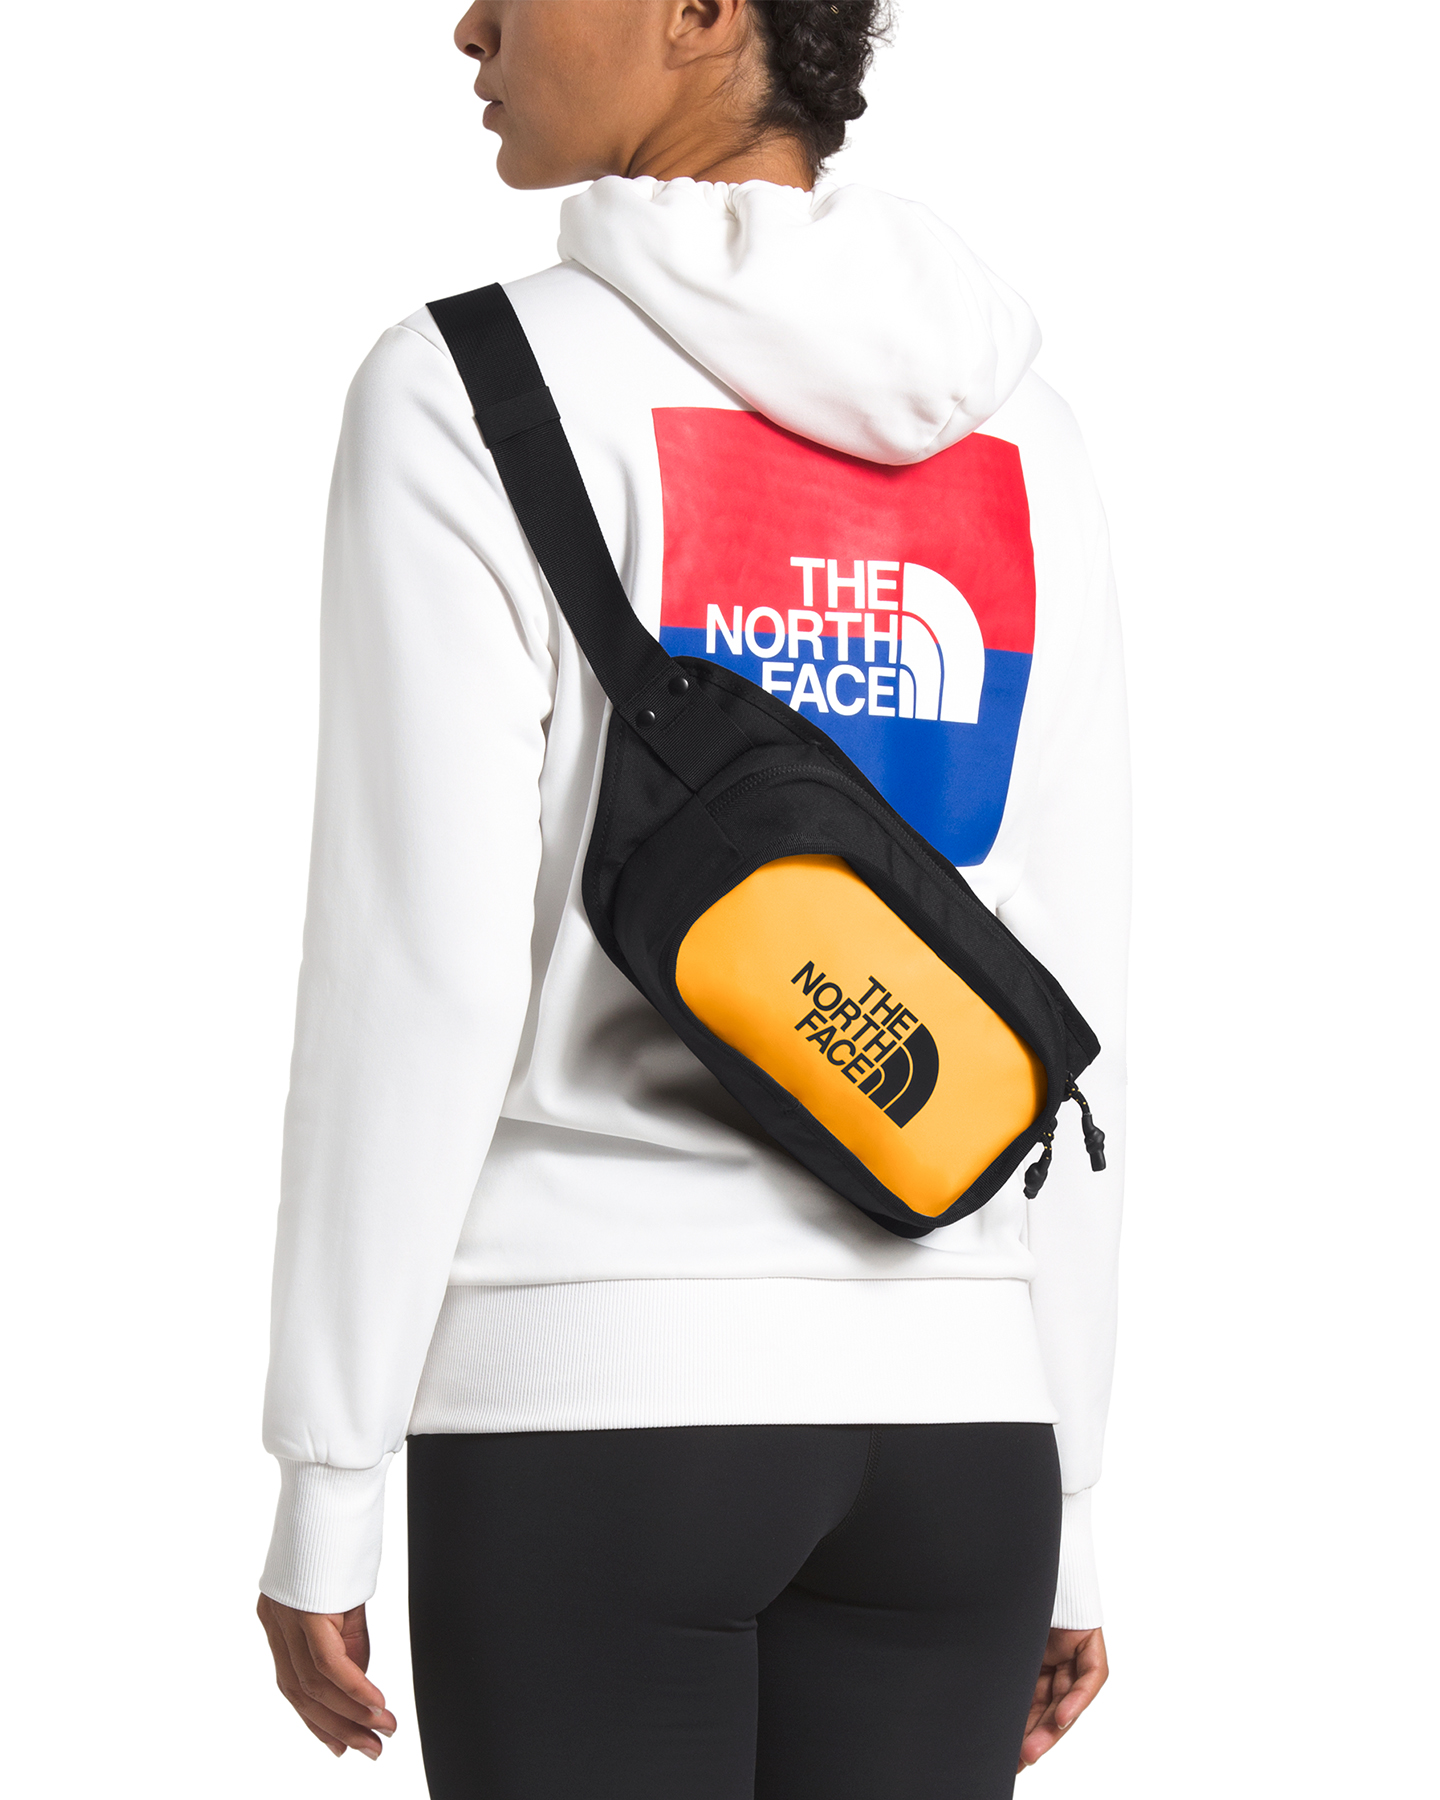 The North Face Explore Hip Pack - Tnf Yellow | SurfStitch